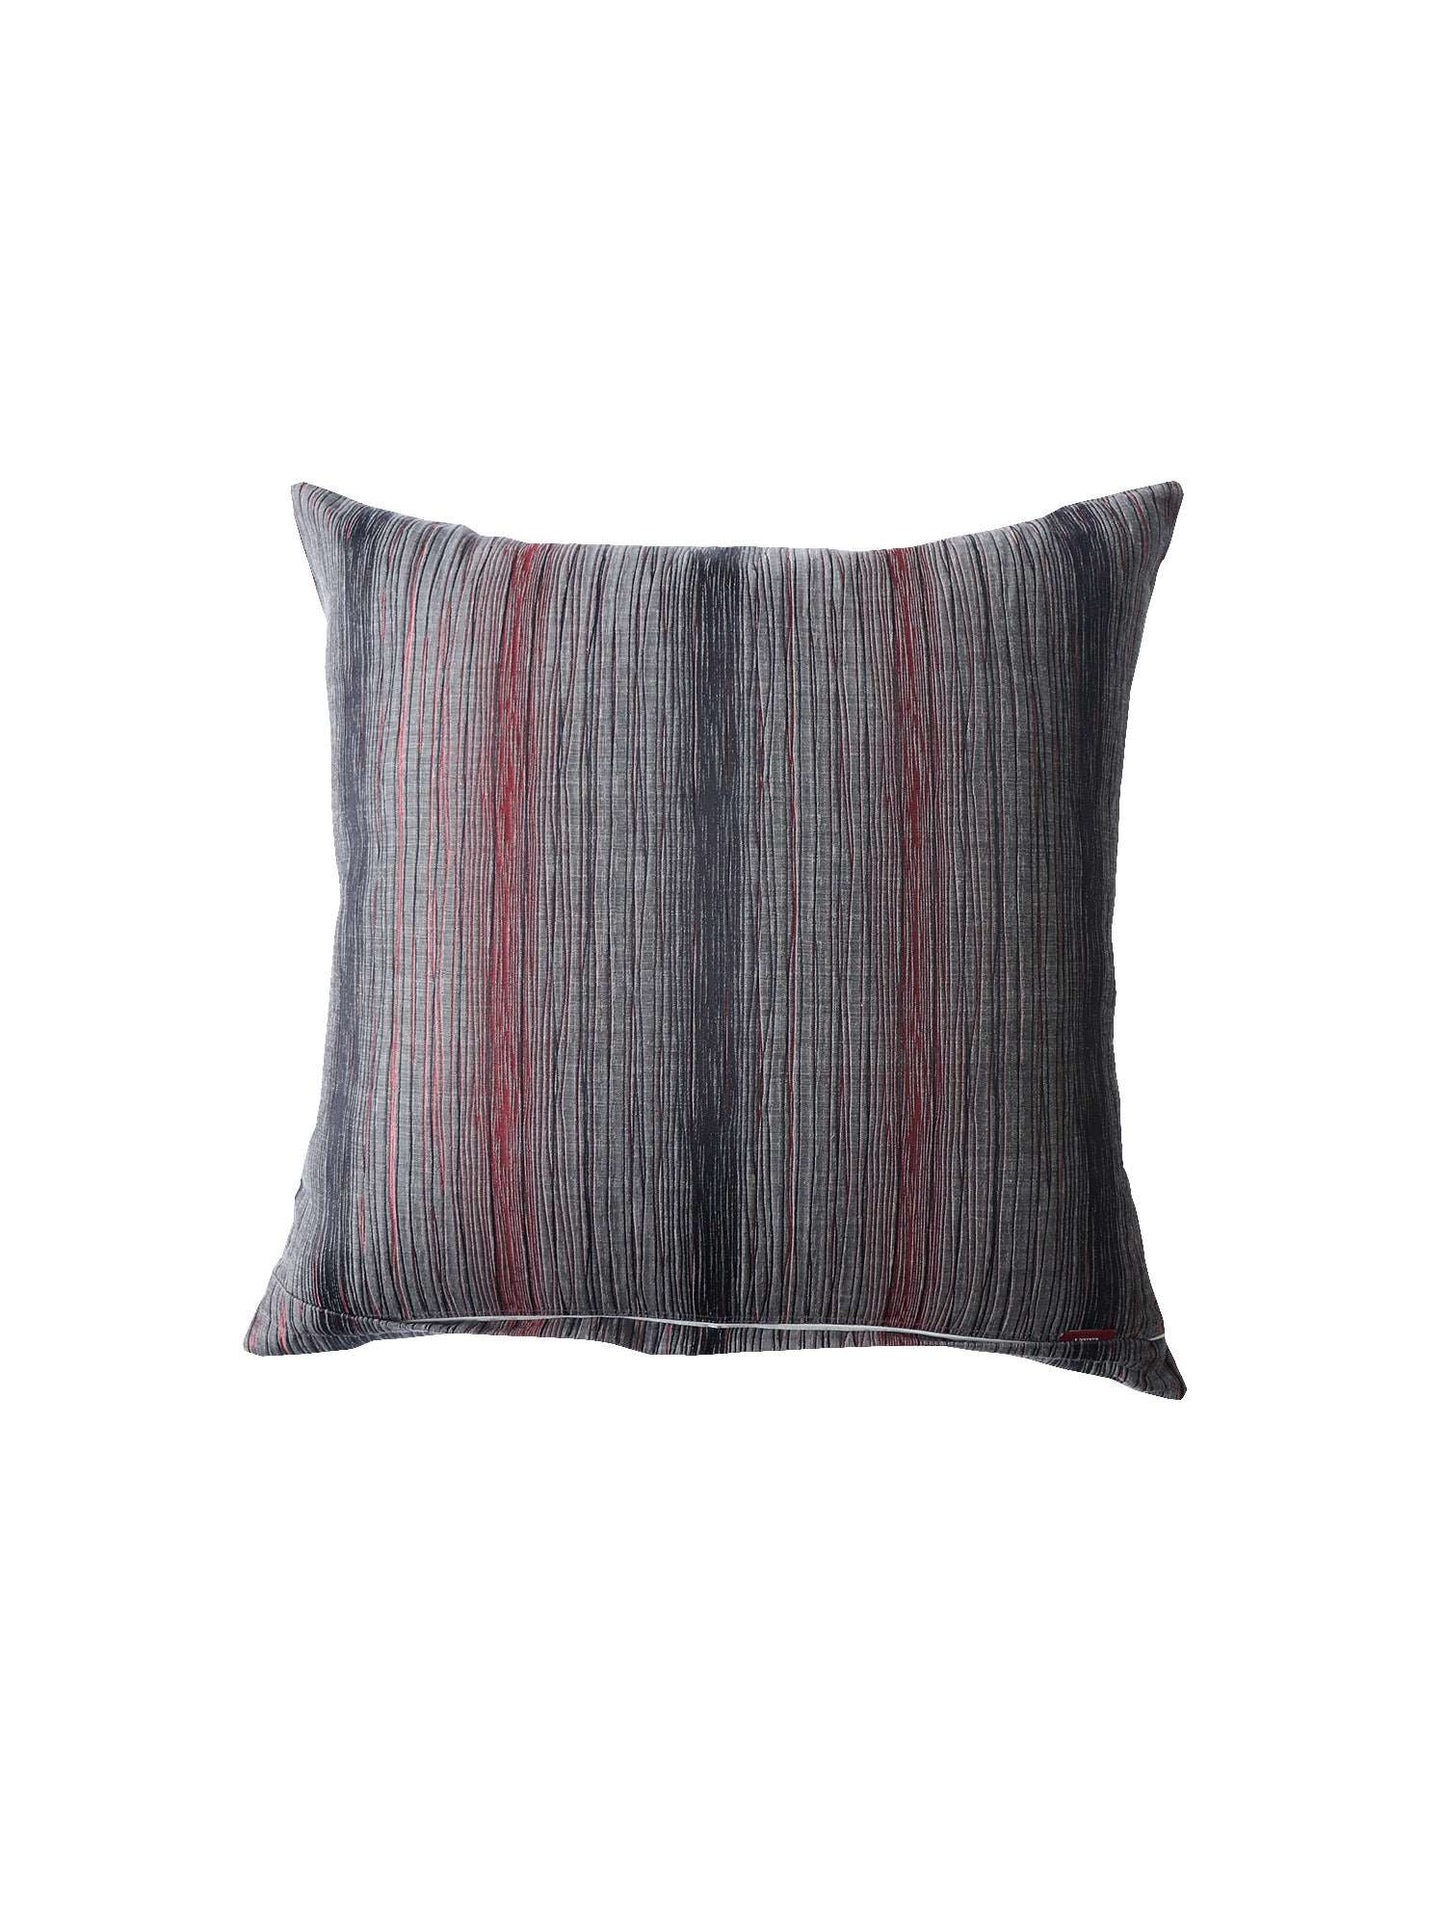 Cushion Cover (Euroshams) for Sofa, Bed Cotton Blend | Self Textured | Grey Red - 24x24in(61x61cm) (Pack of 1)